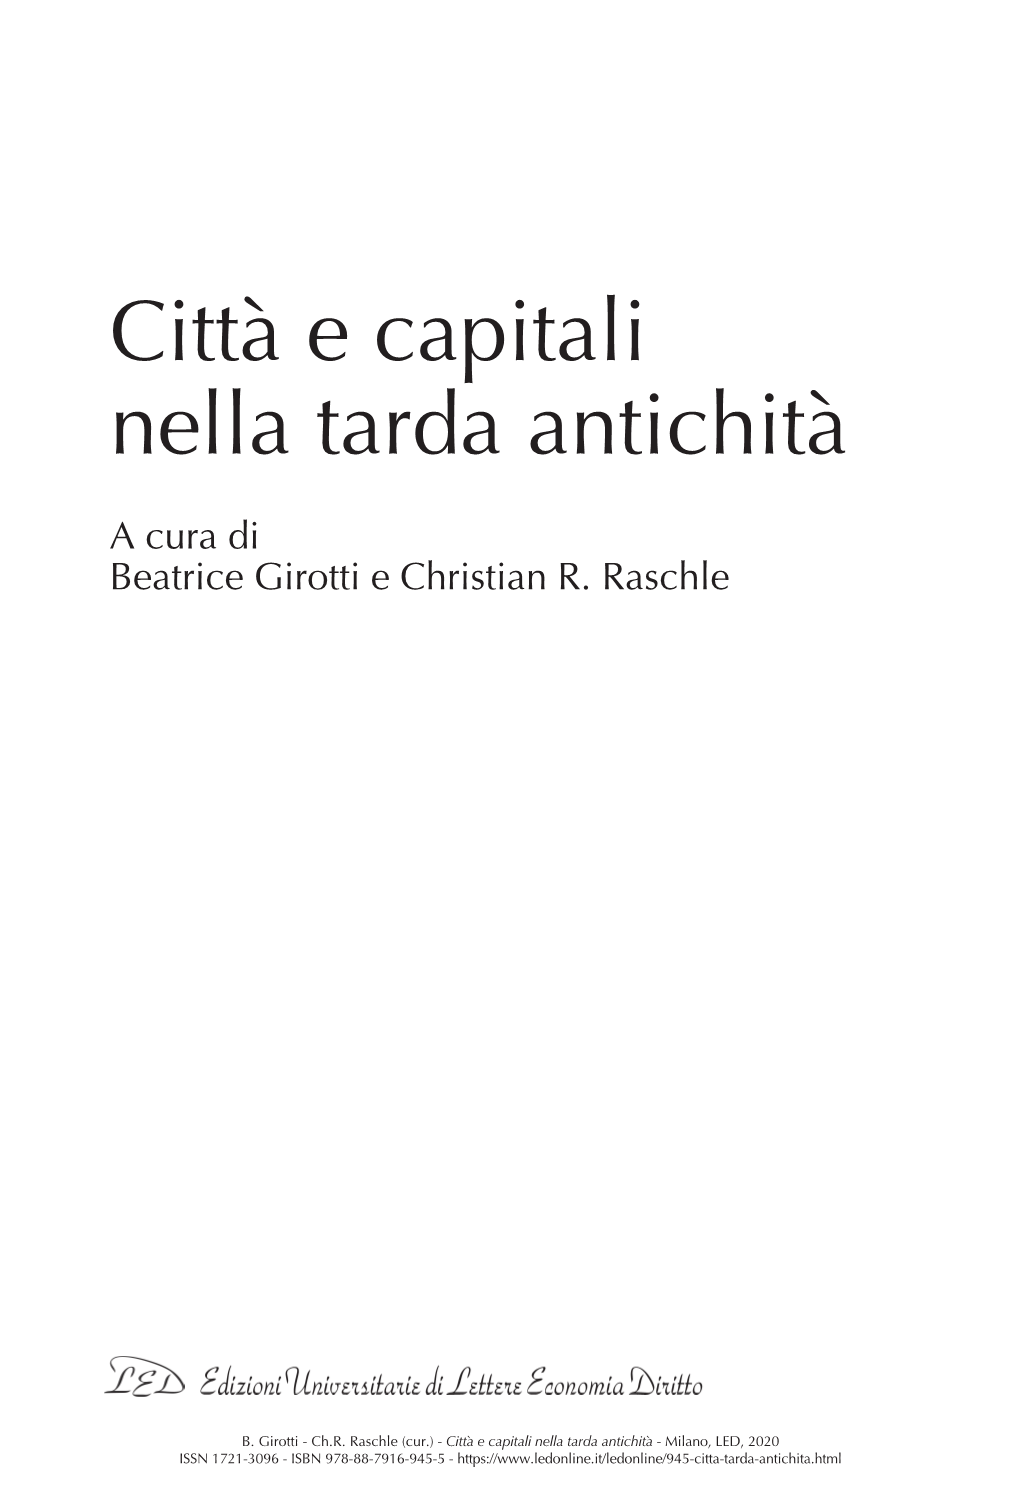 Constantinople and Rome, Christian Capitals